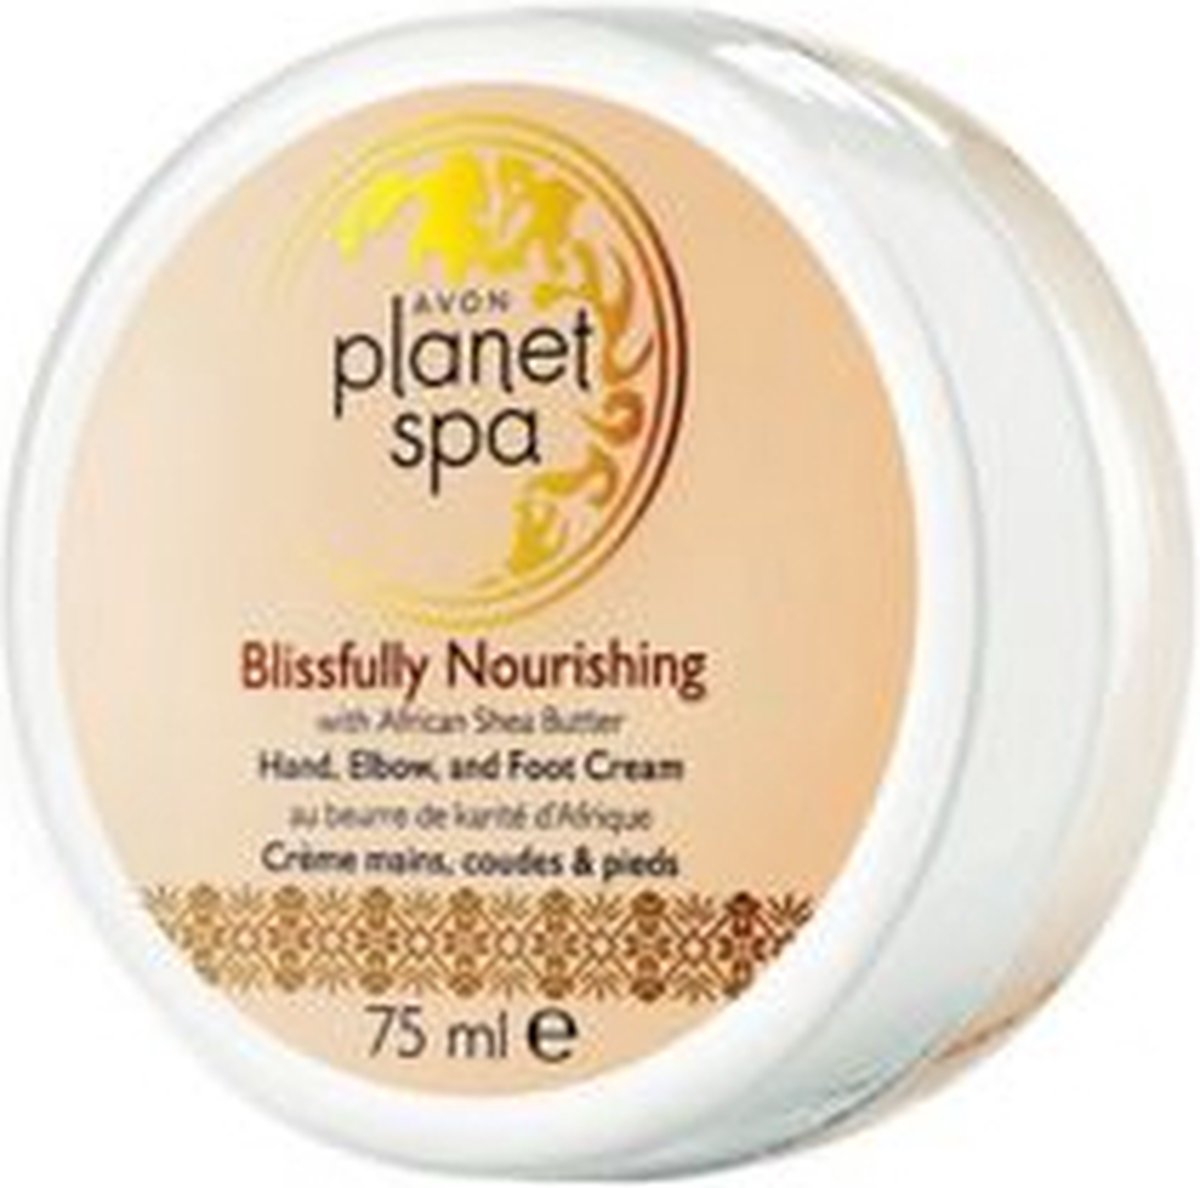 Nourishing Cream for hands, feet and elbows with shea butter Planet Spa (Hand, Elbow and Foot Cream Blissfully Nourishing Shea Butter with African)